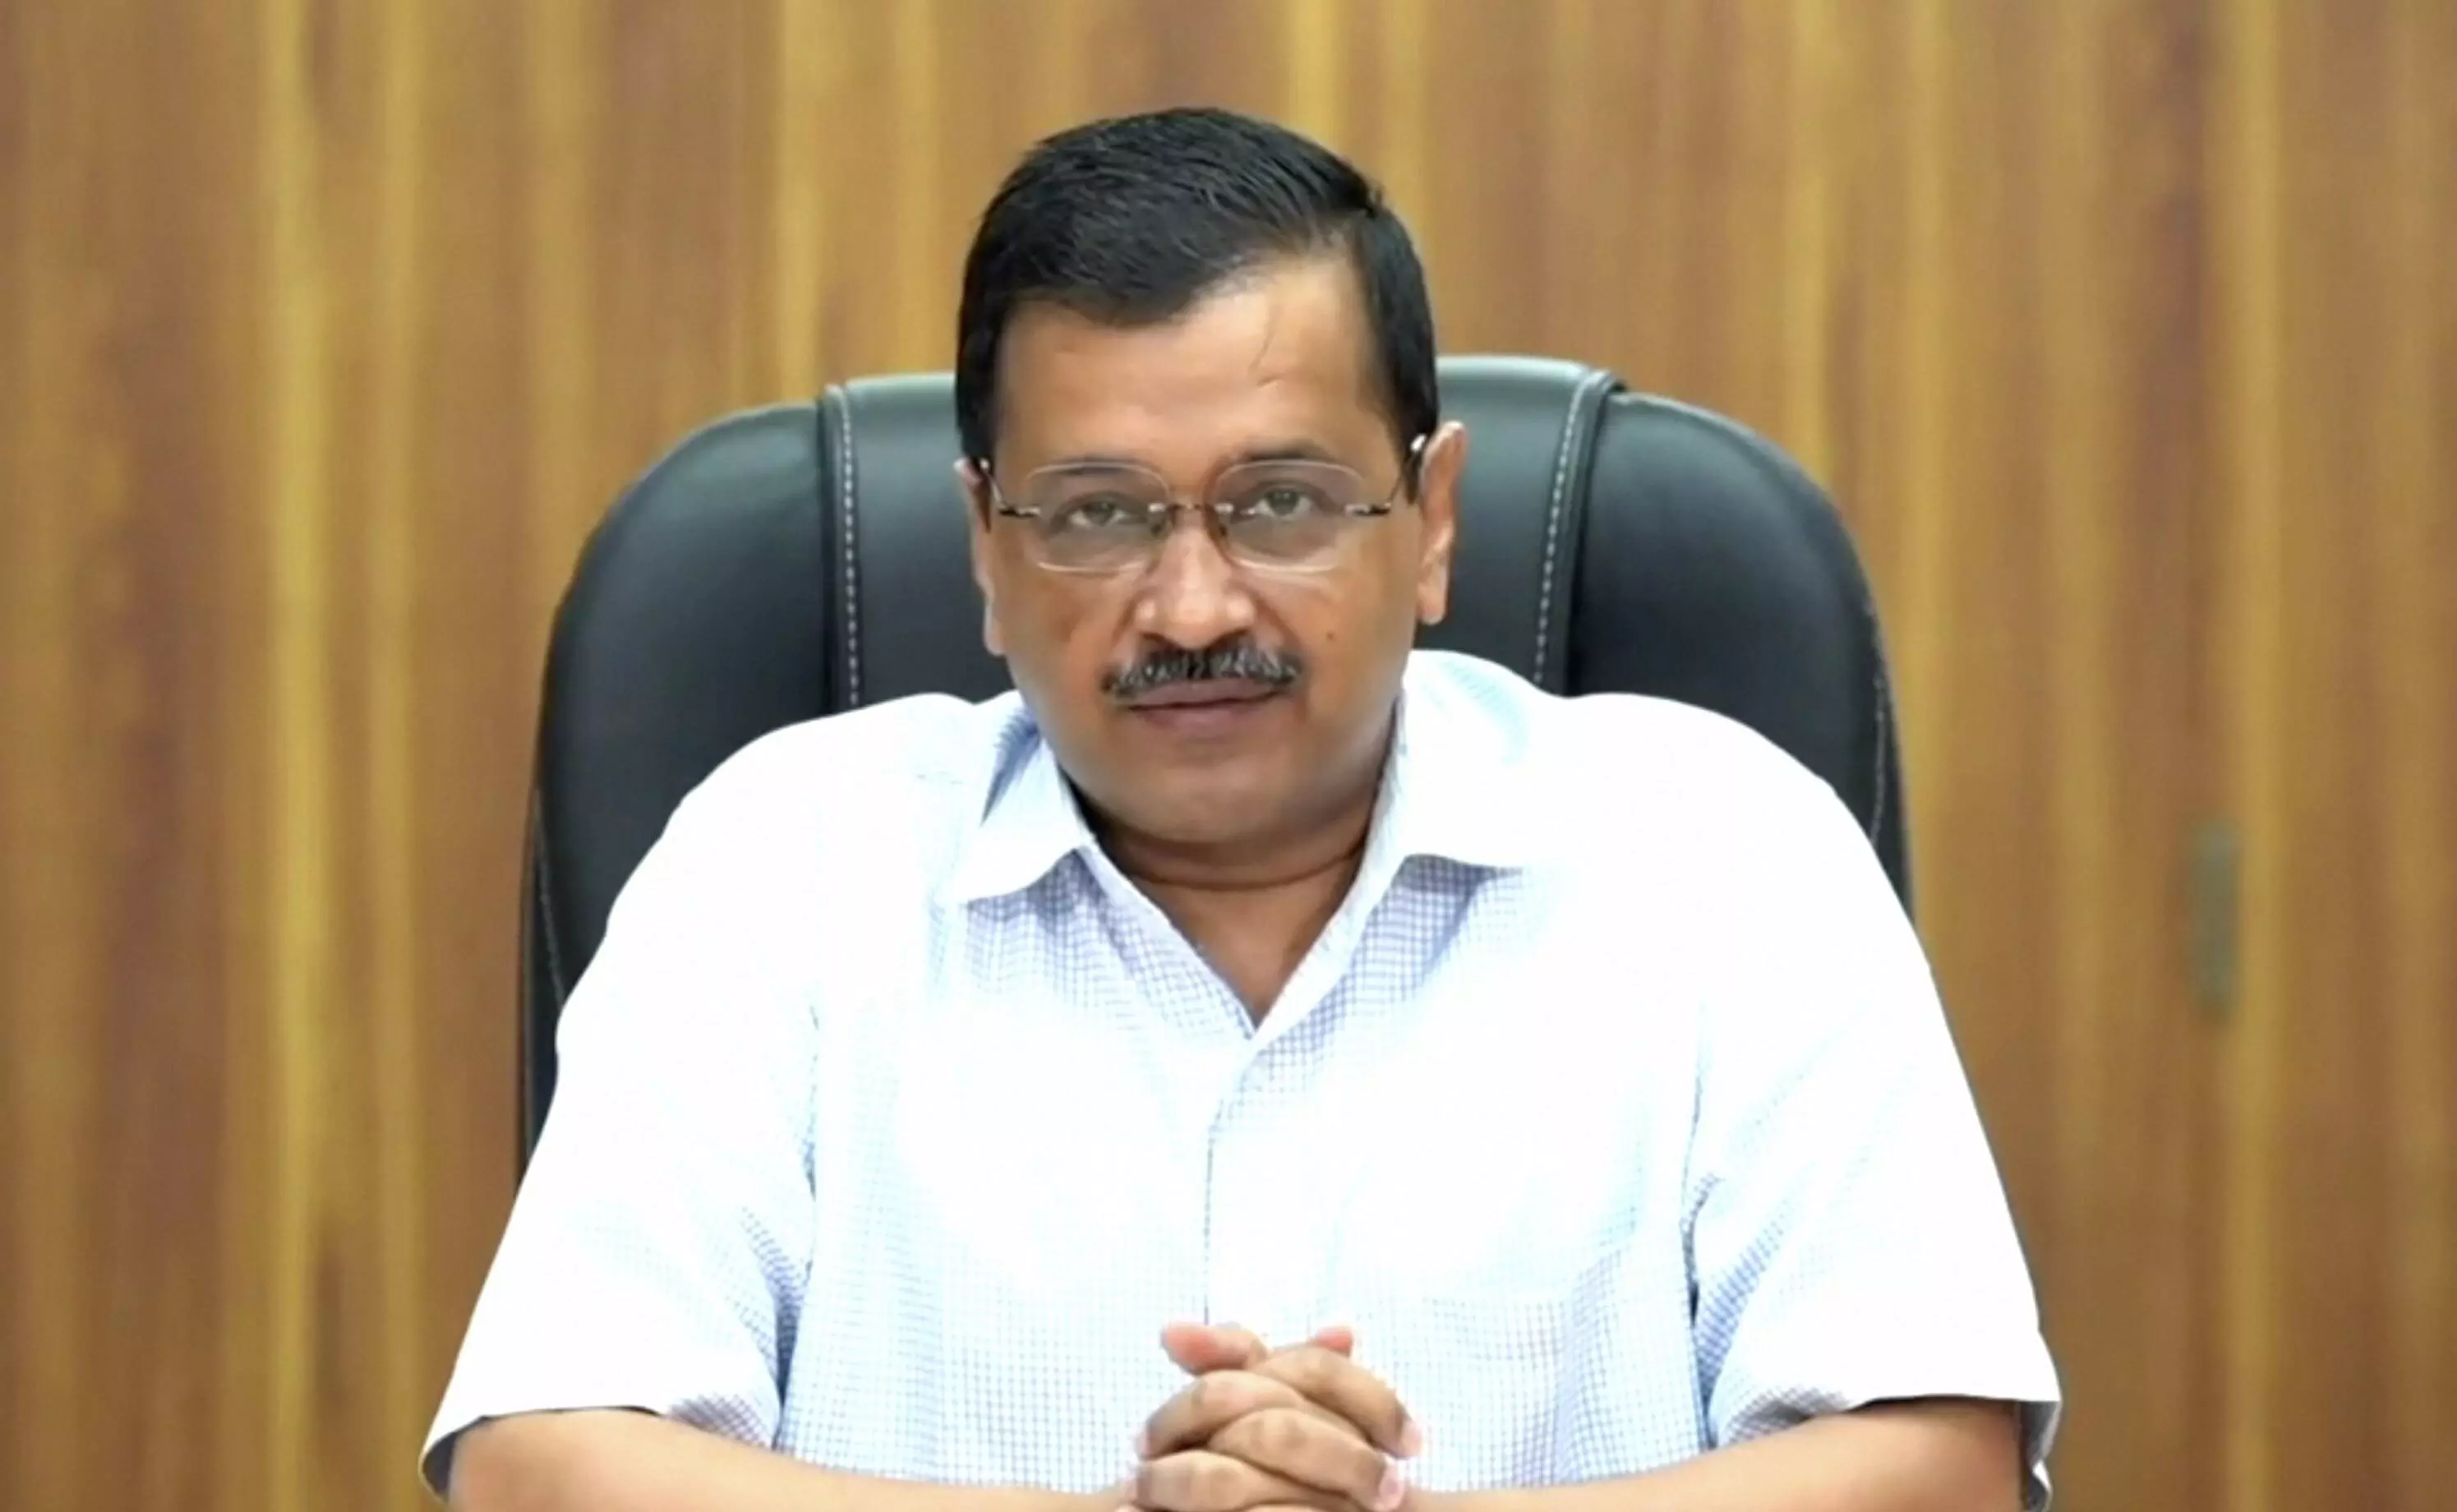 If needed, Delhi govt will bring law to provide social security to gig workers: Kejriwal